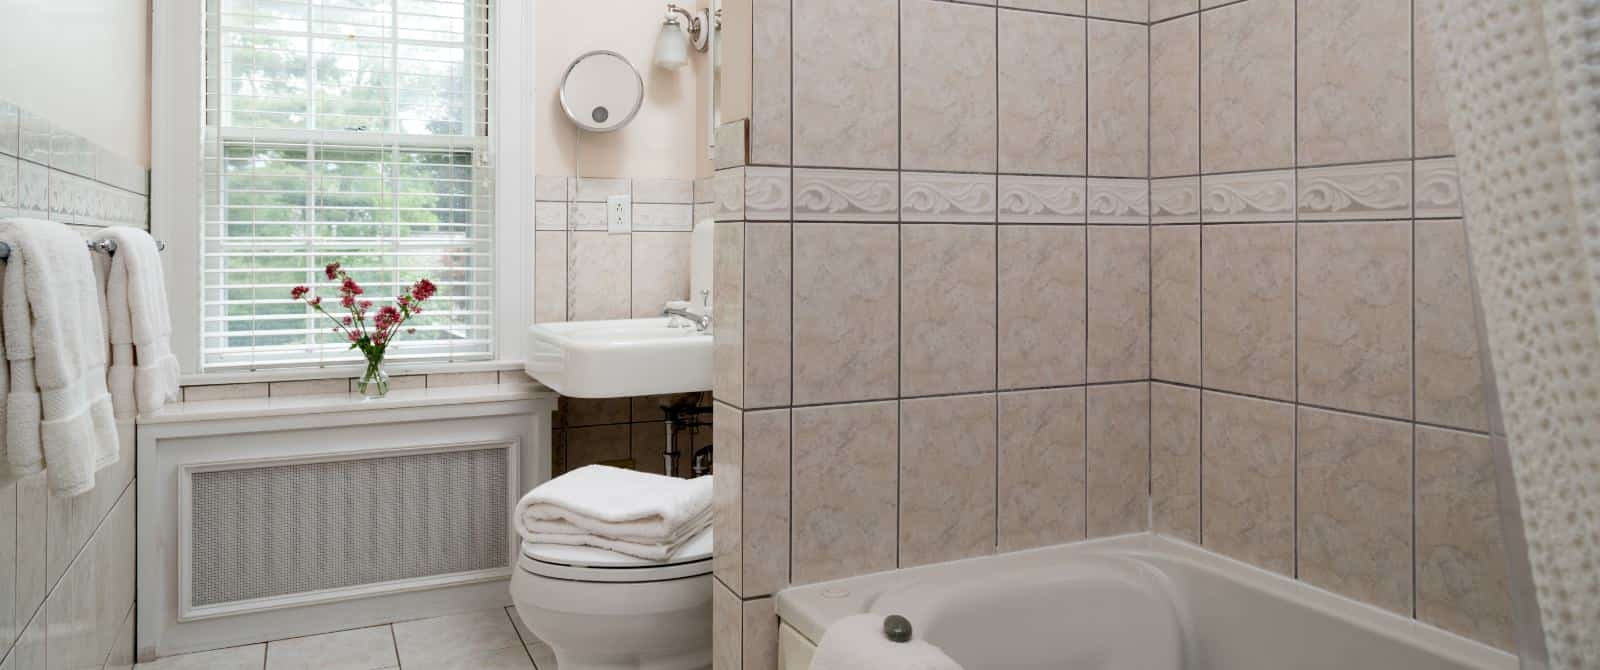 Bathroom with light colored tile, white sink, and white tub